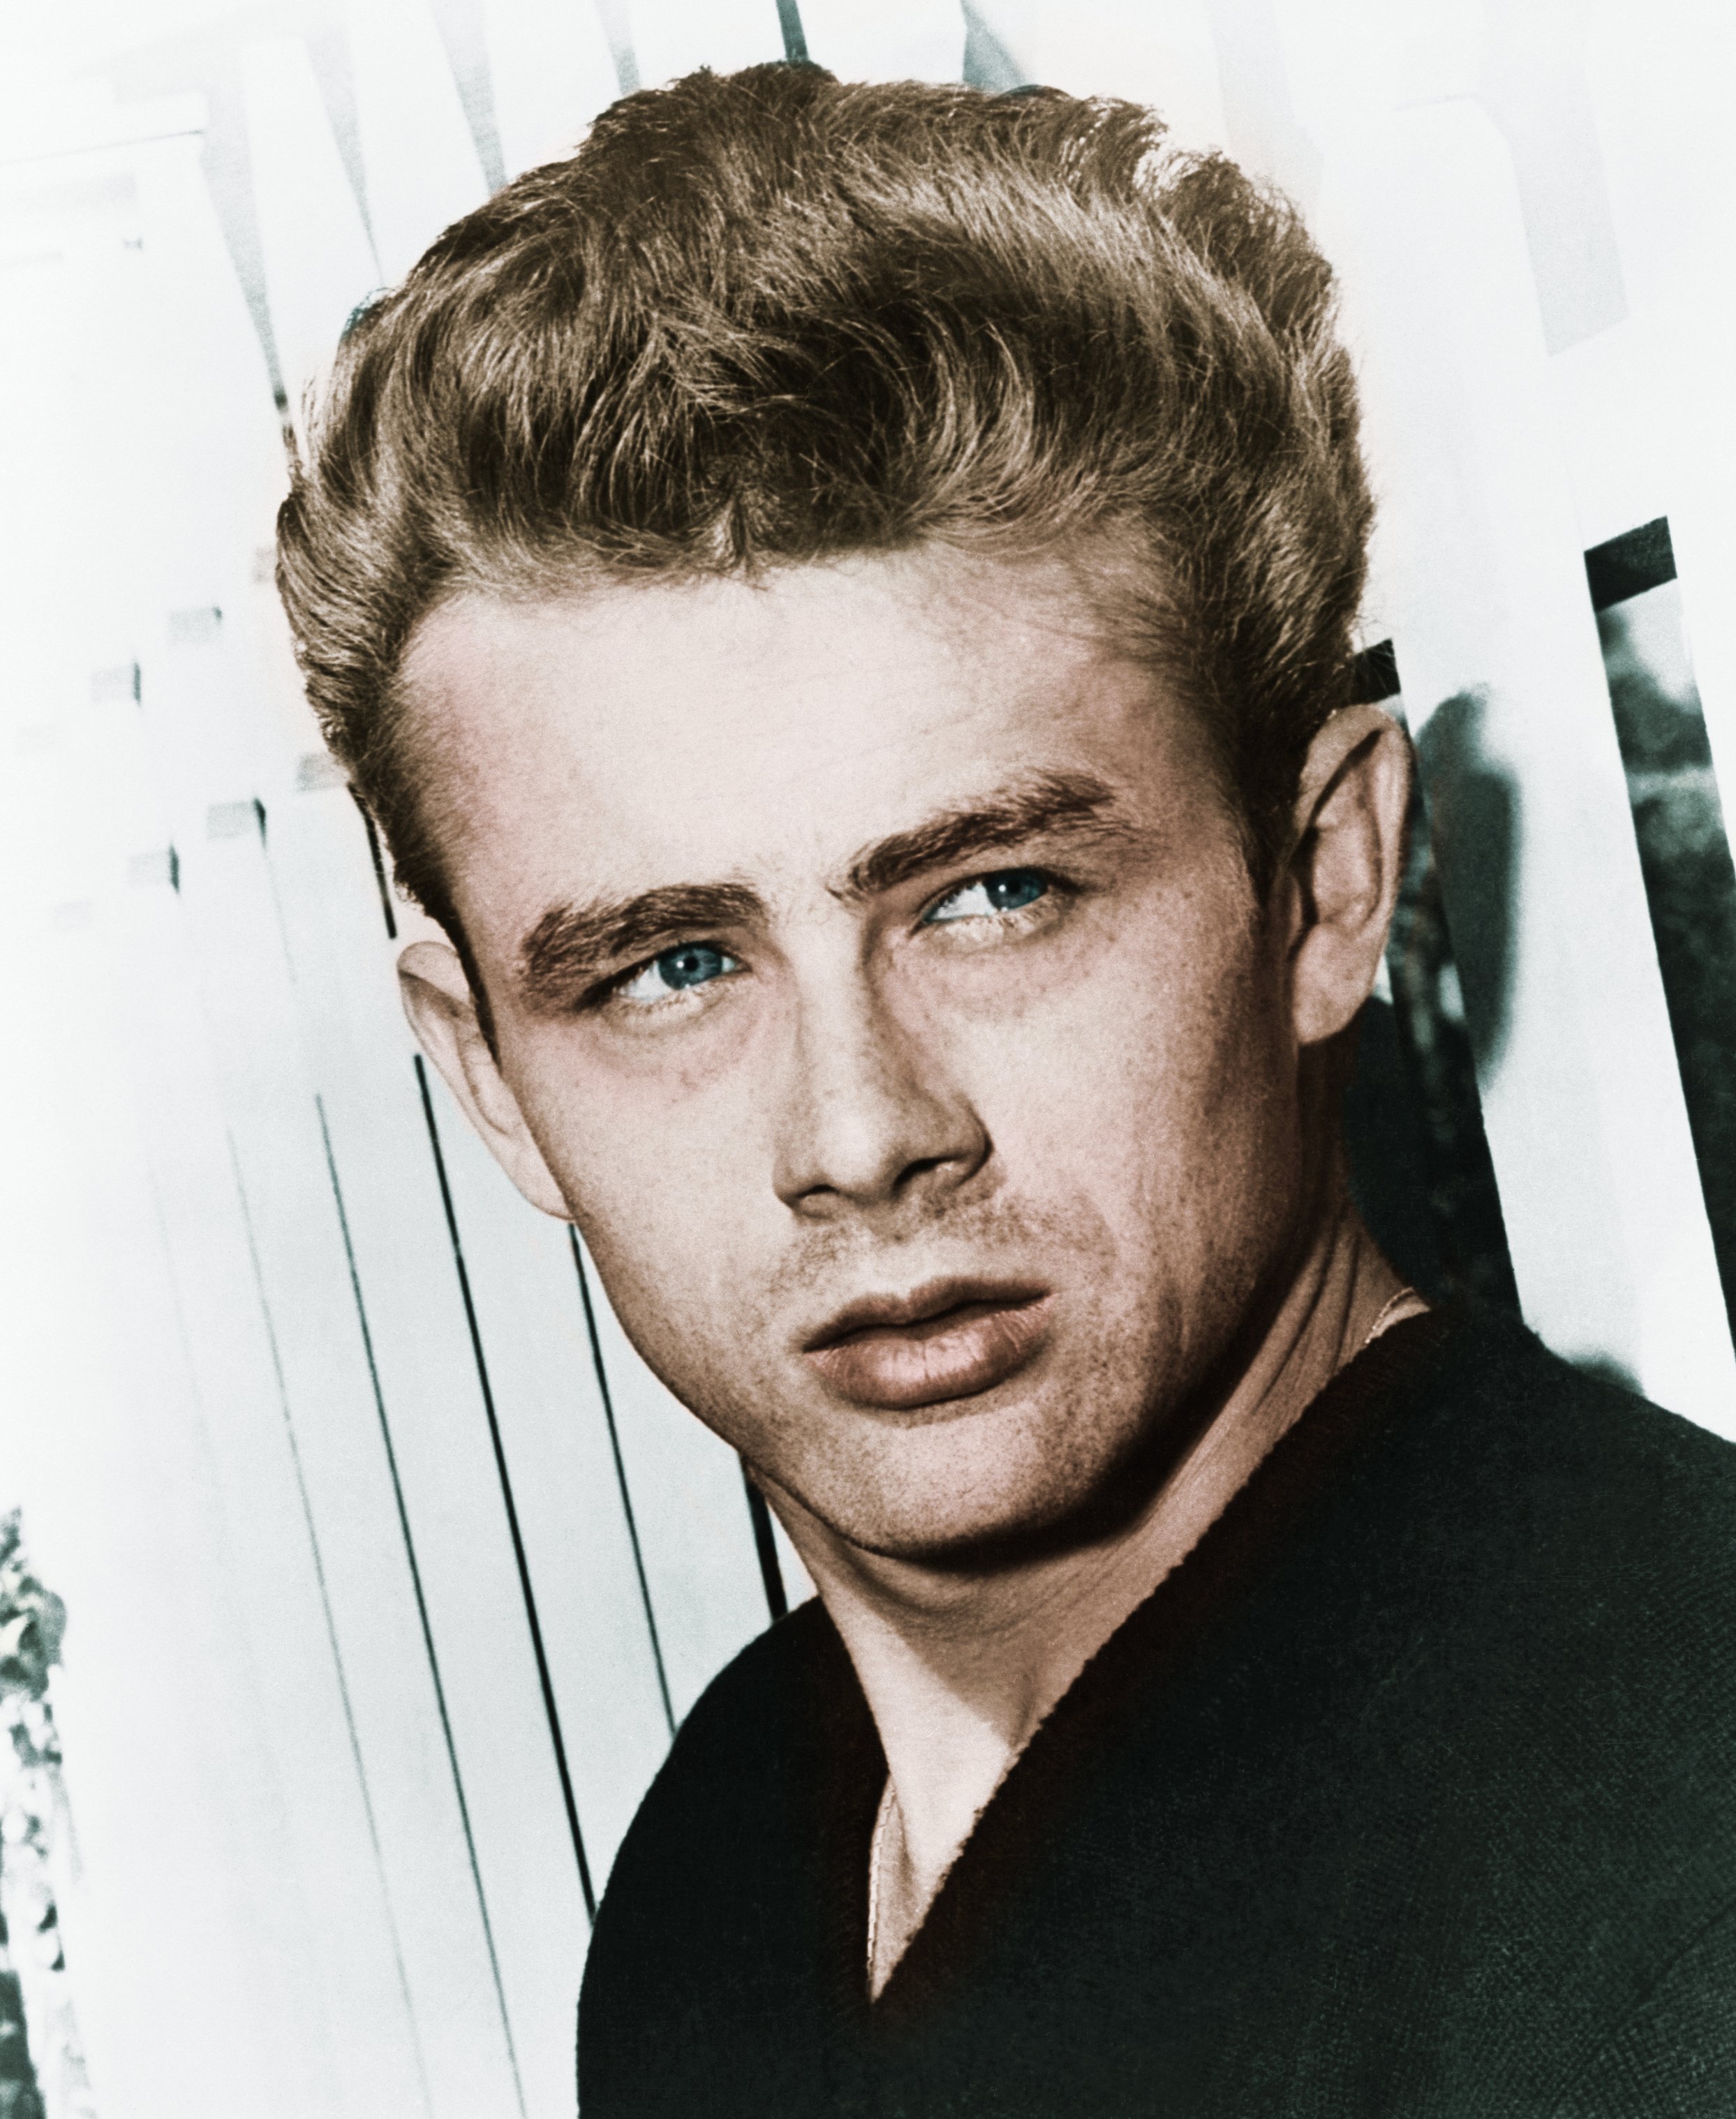 Actor James Dean leaning against a picket fence. | Source: Getty Images